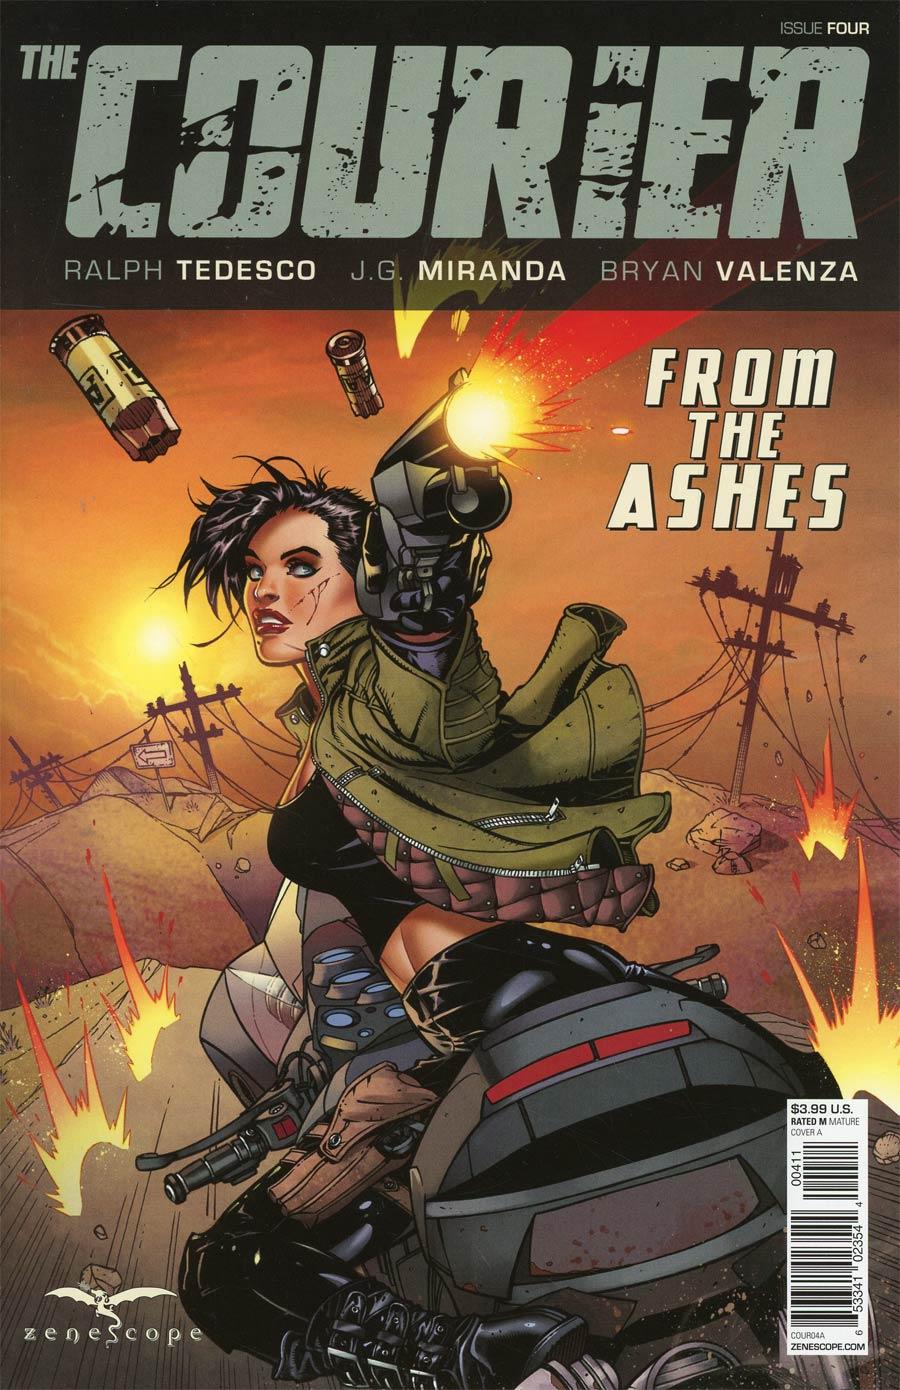 Courier From The Ashes Vol. 1 #4